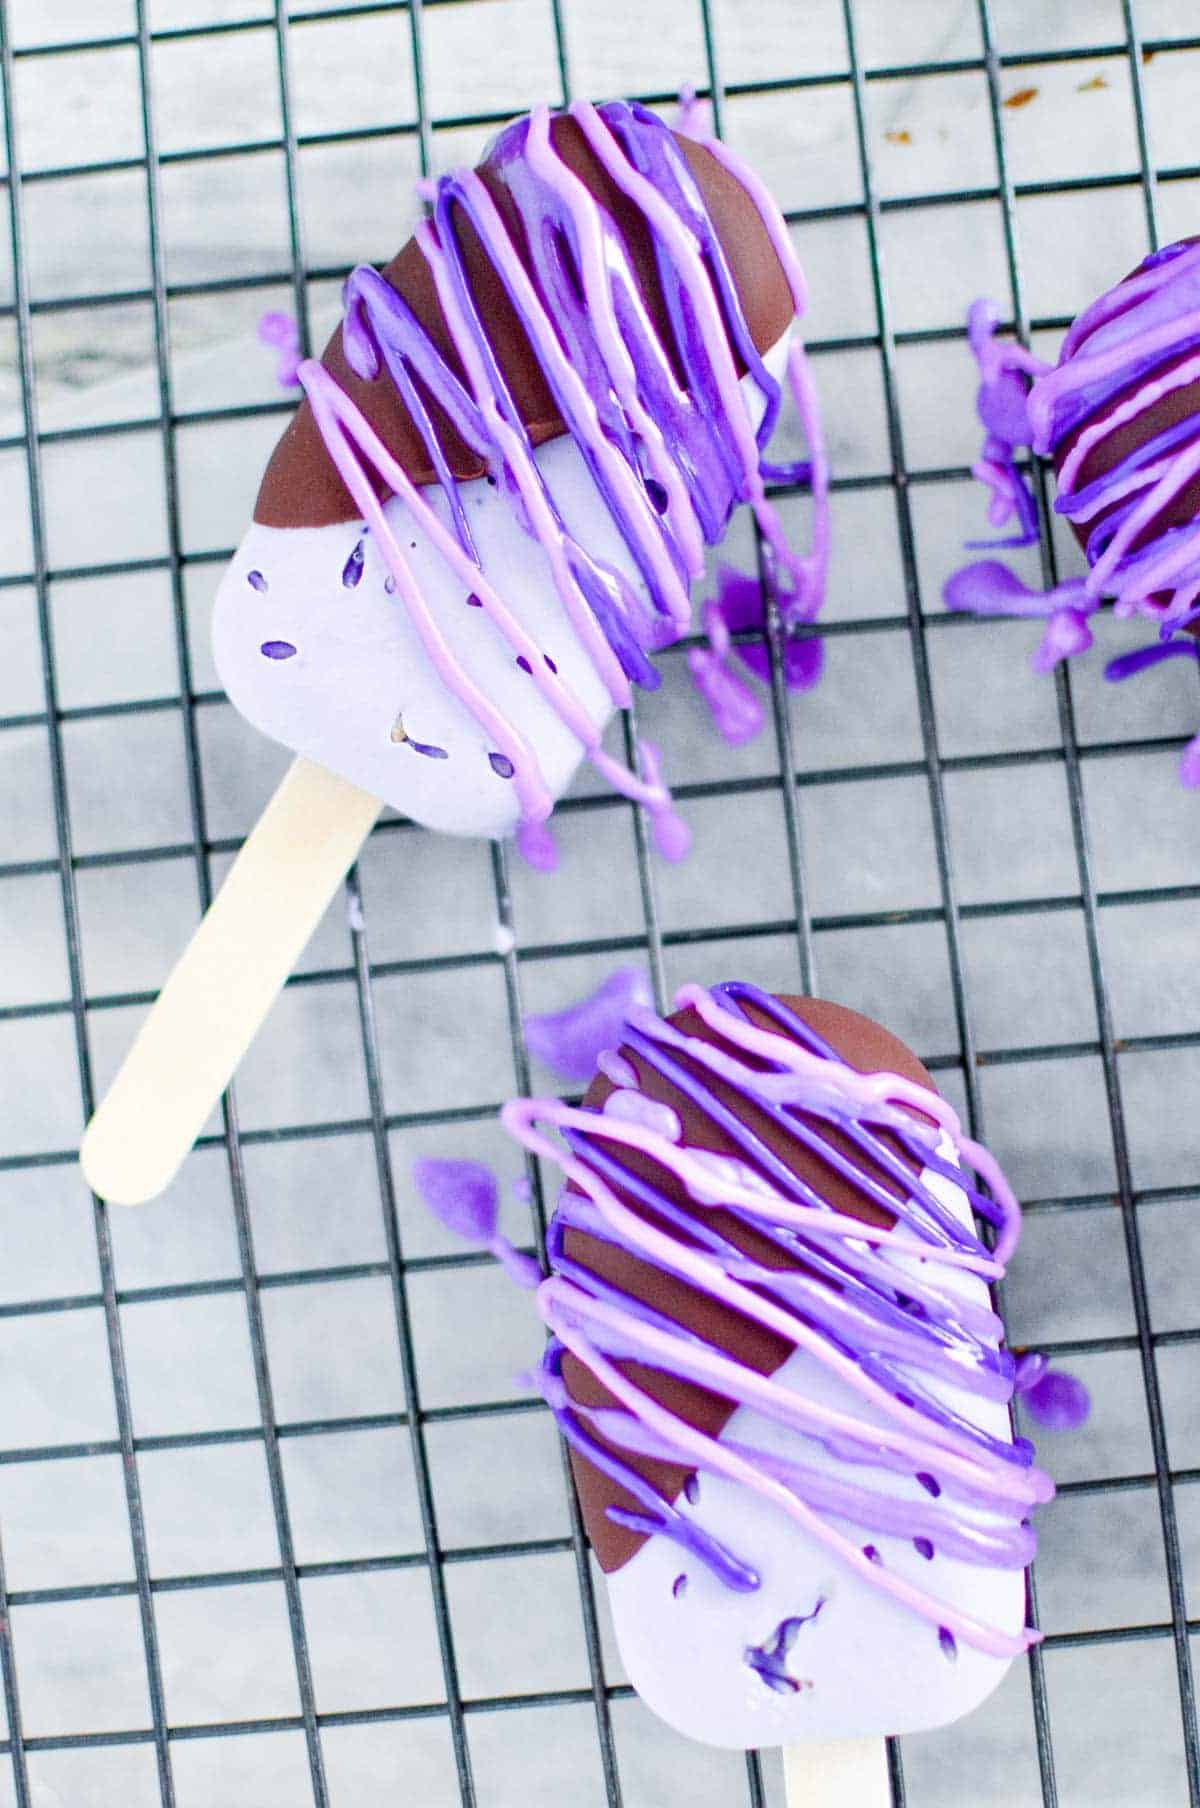 Vegan lavender ice cream bars dipped in chocolate with purple royal icing drizzle.